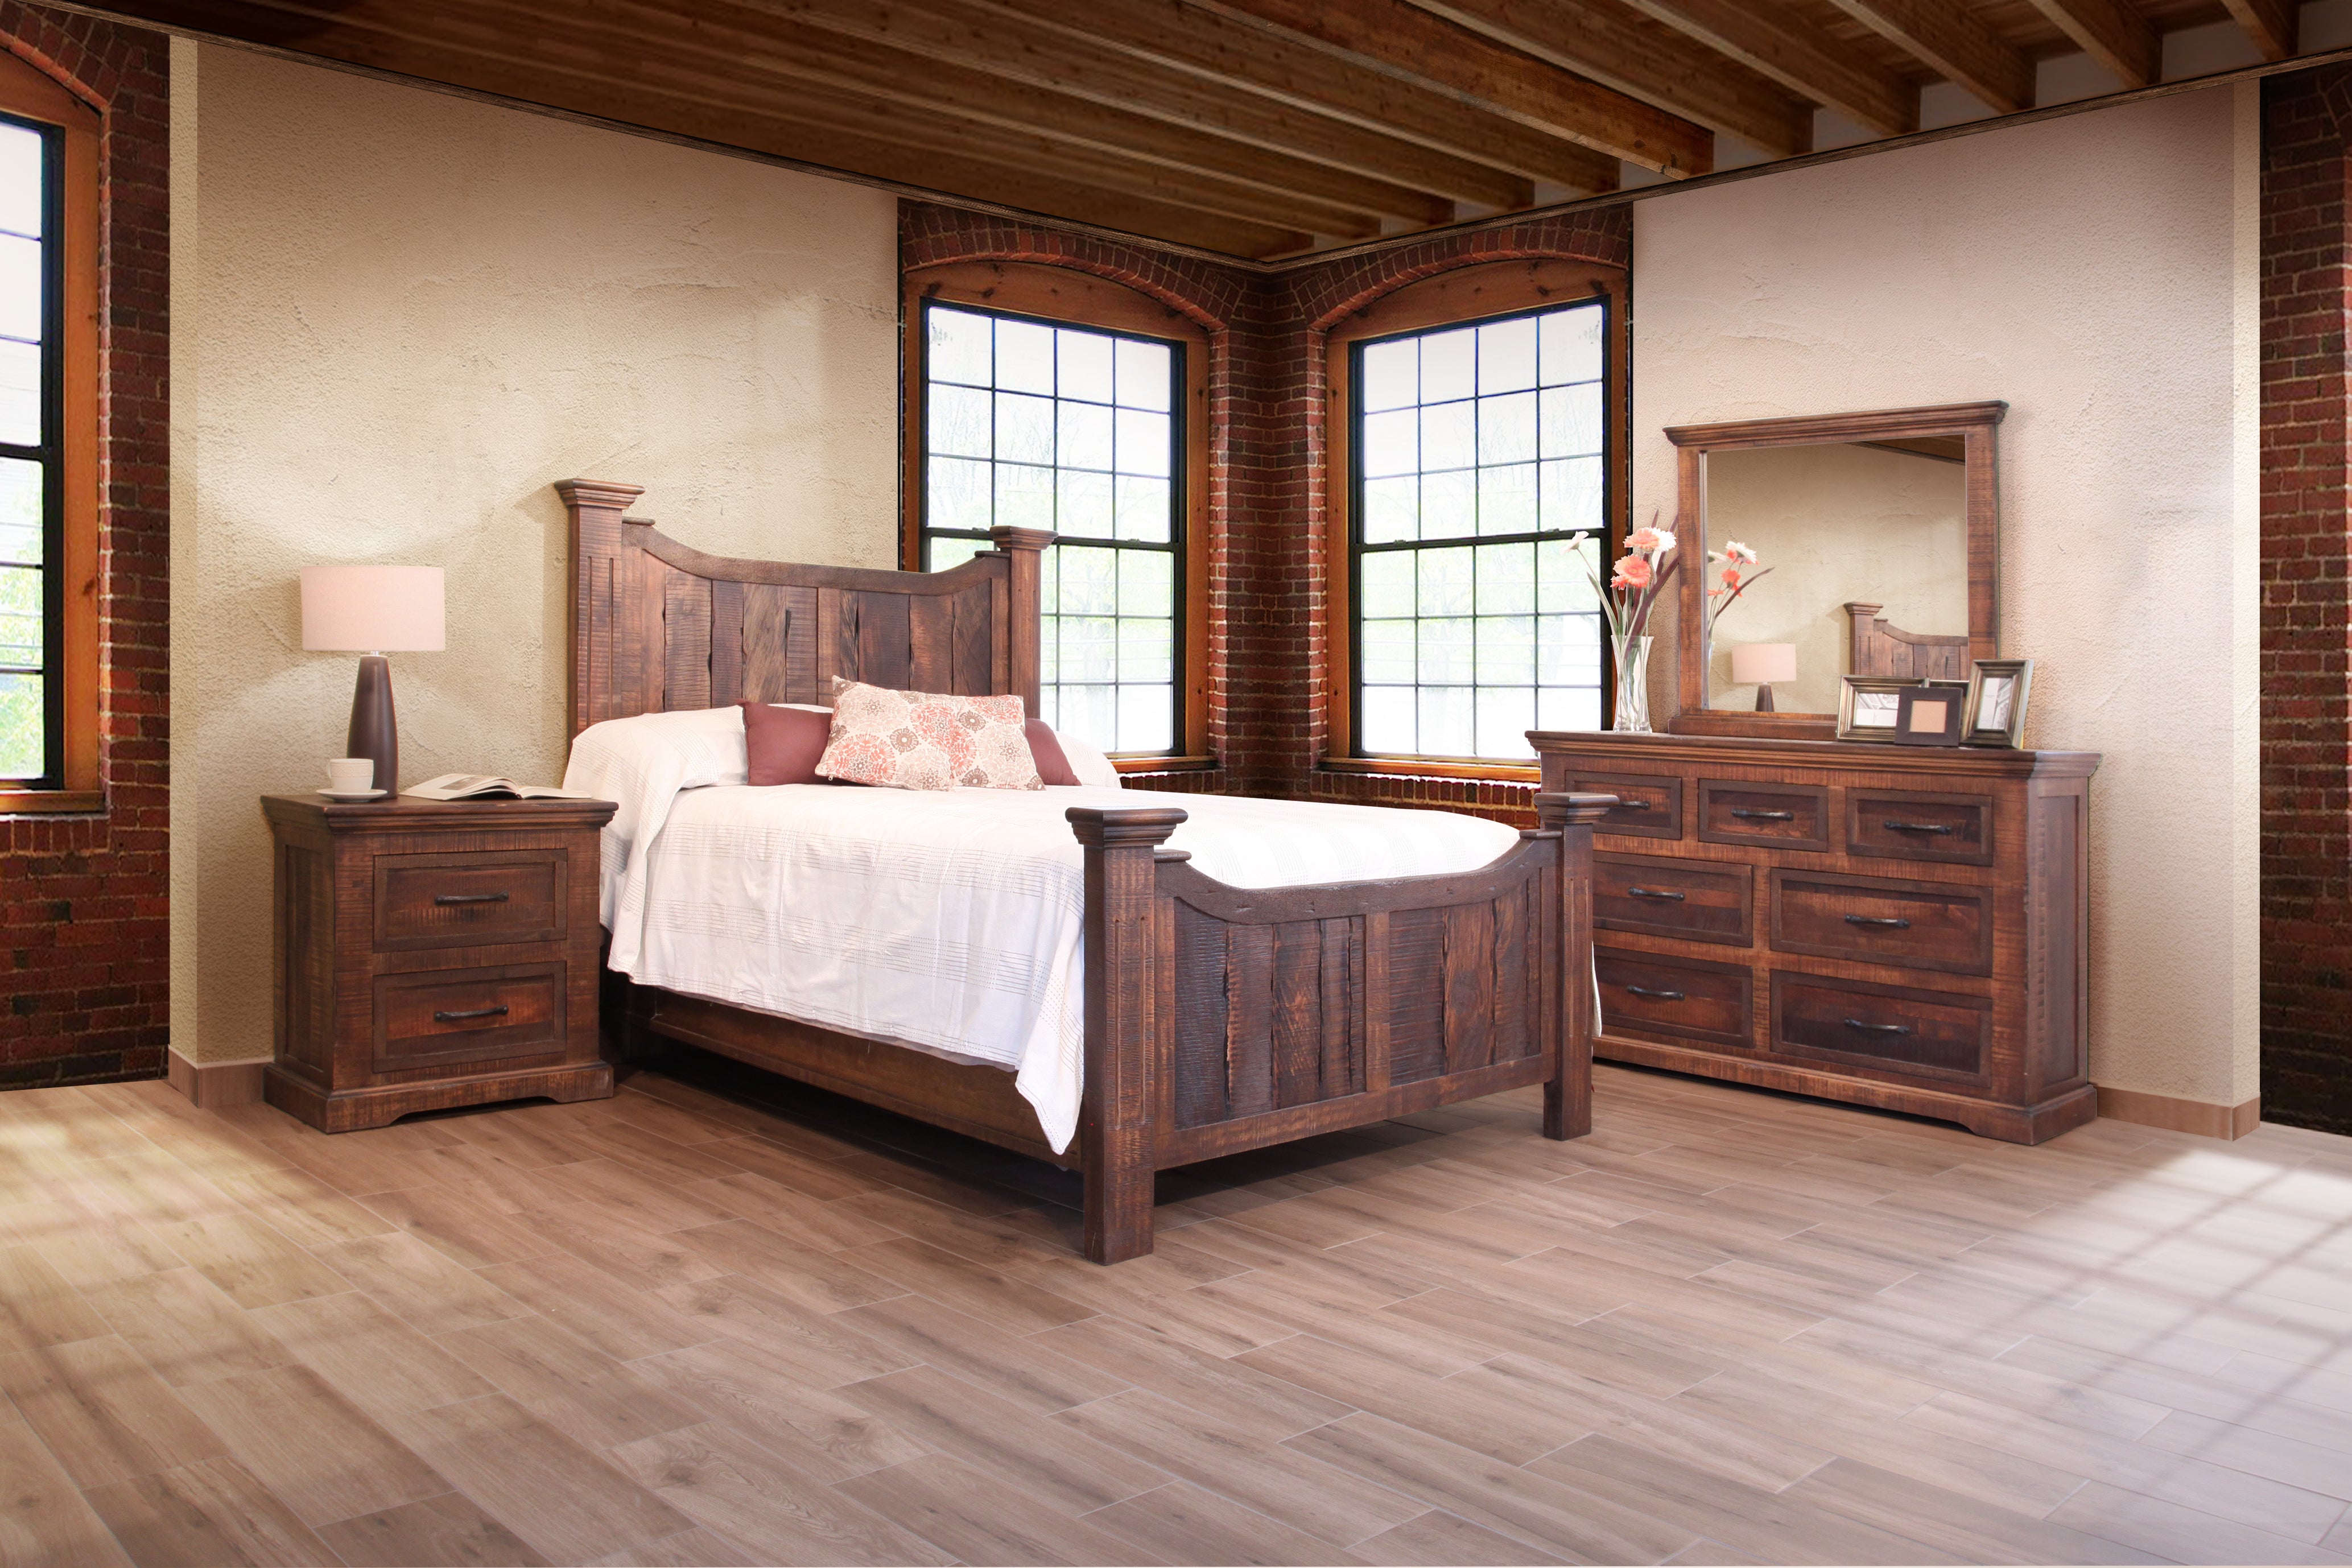 1200 MADEIRA Model: IFD1200 BEDROOM Collection